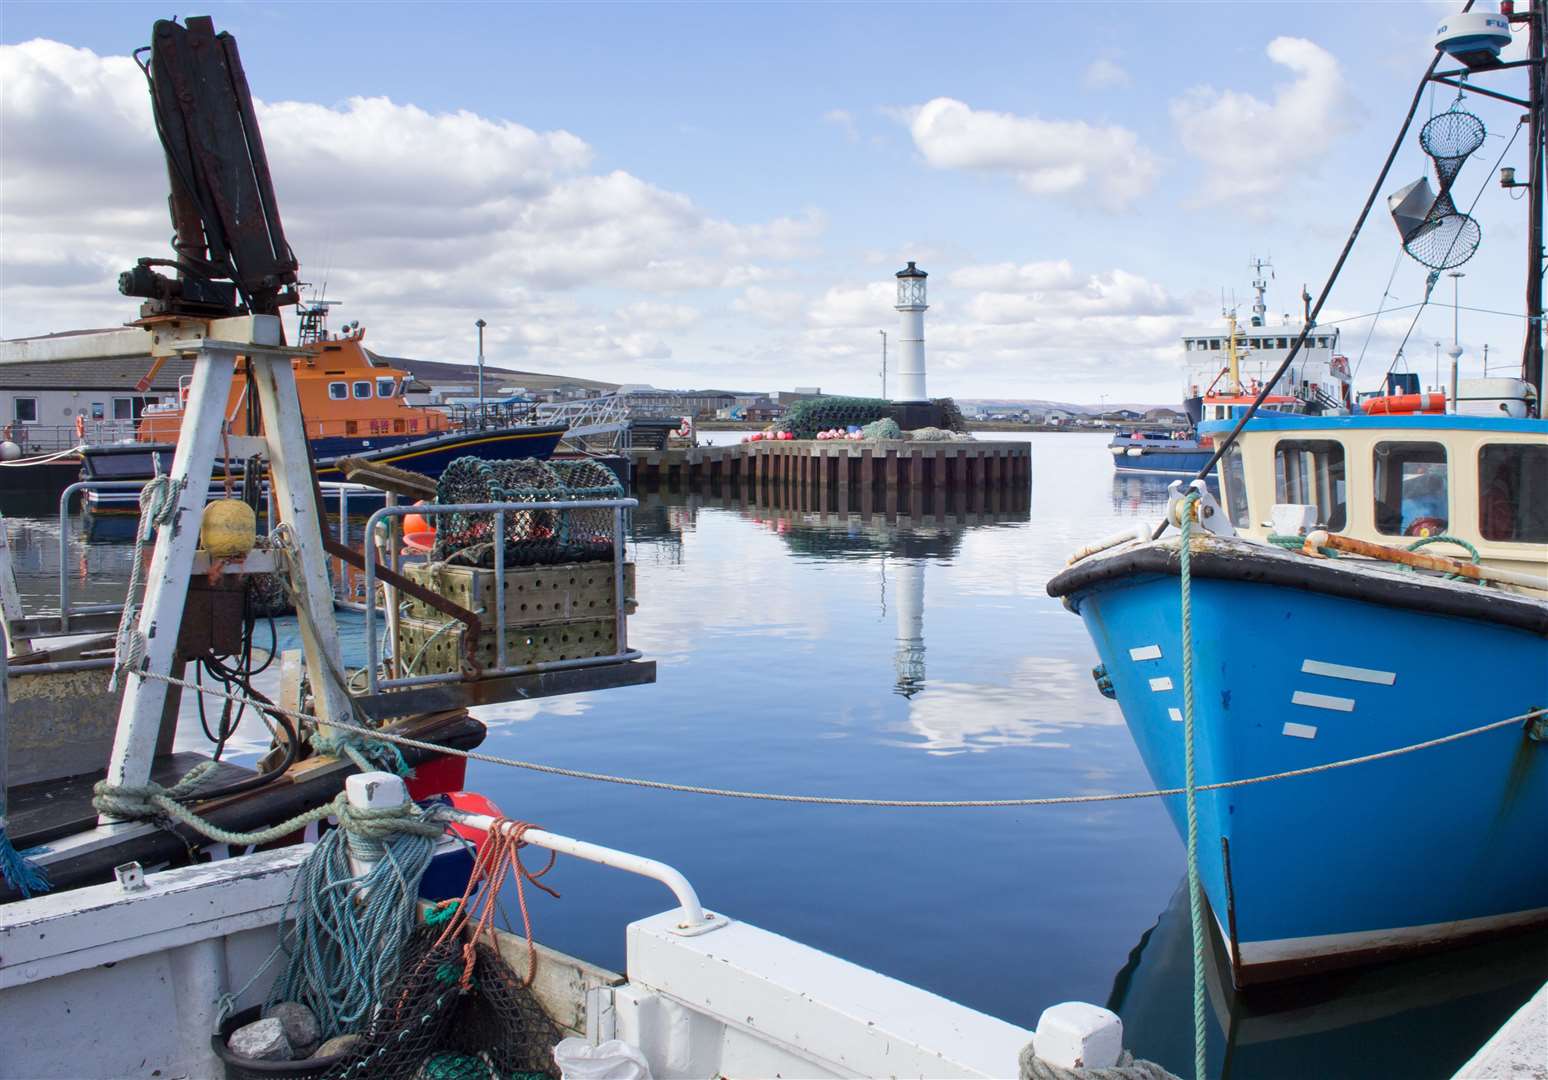 Fishing faces export uncertainty after Brexit trade deal.